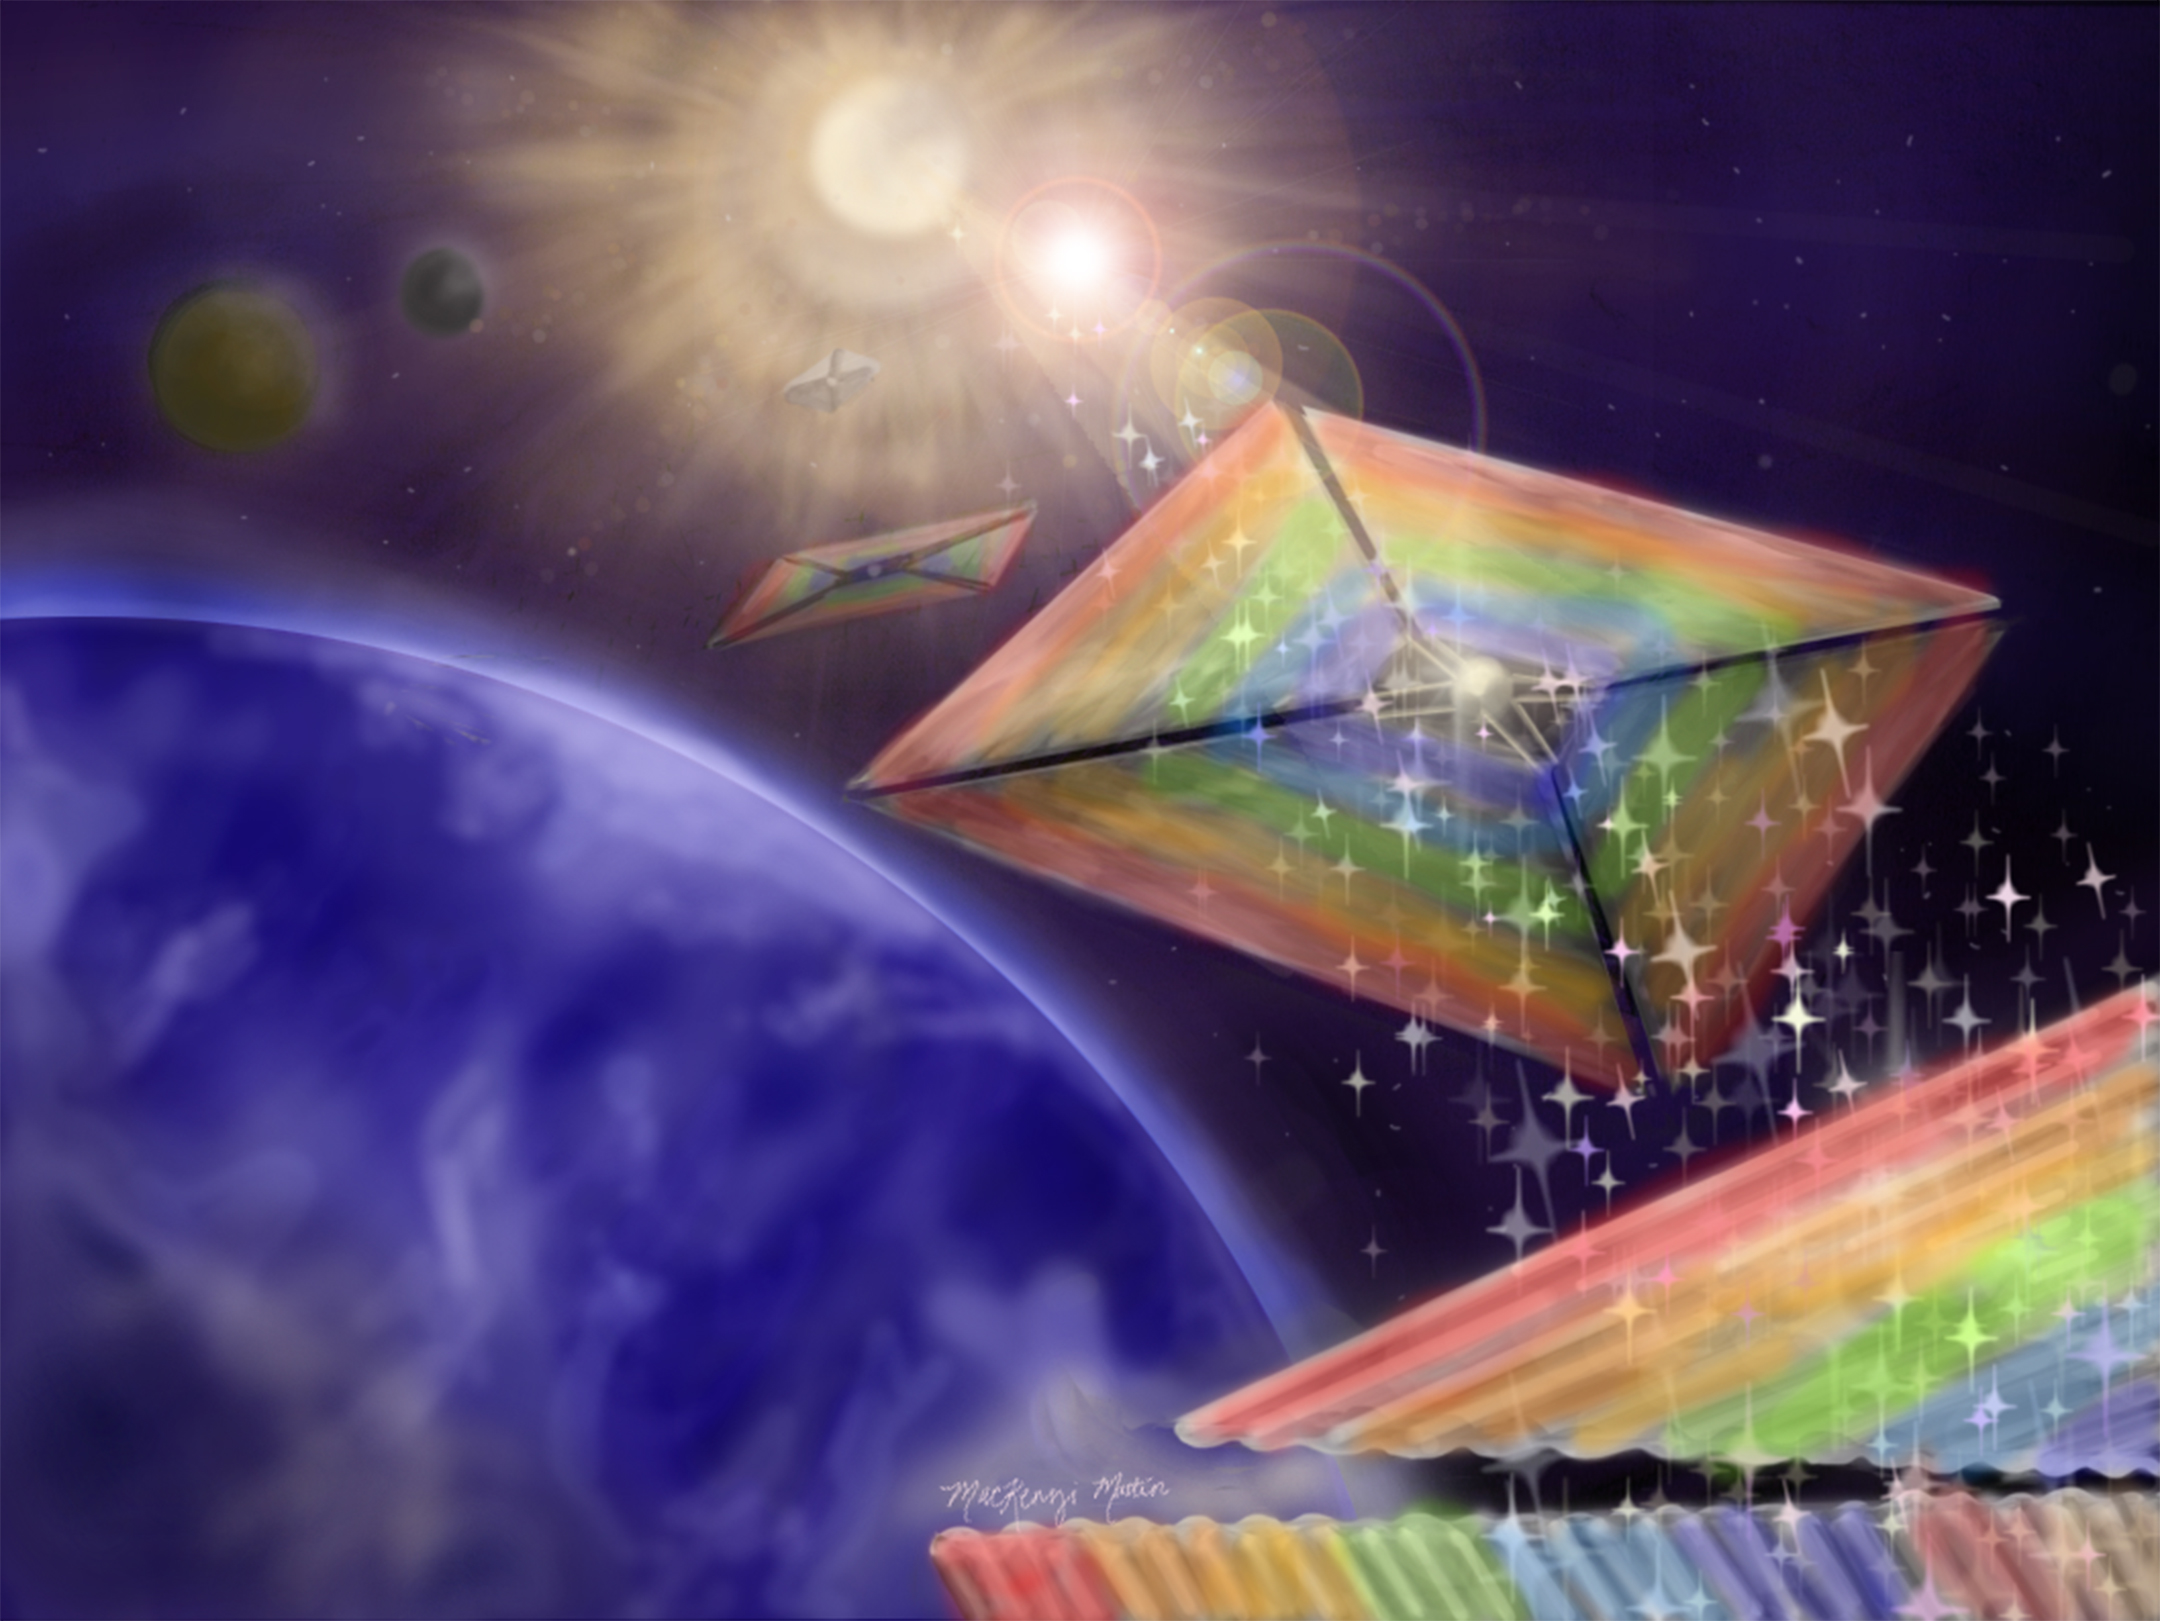 Illustration of three diamond-shaped sails with a rainbow of colors on them floating above the Earth